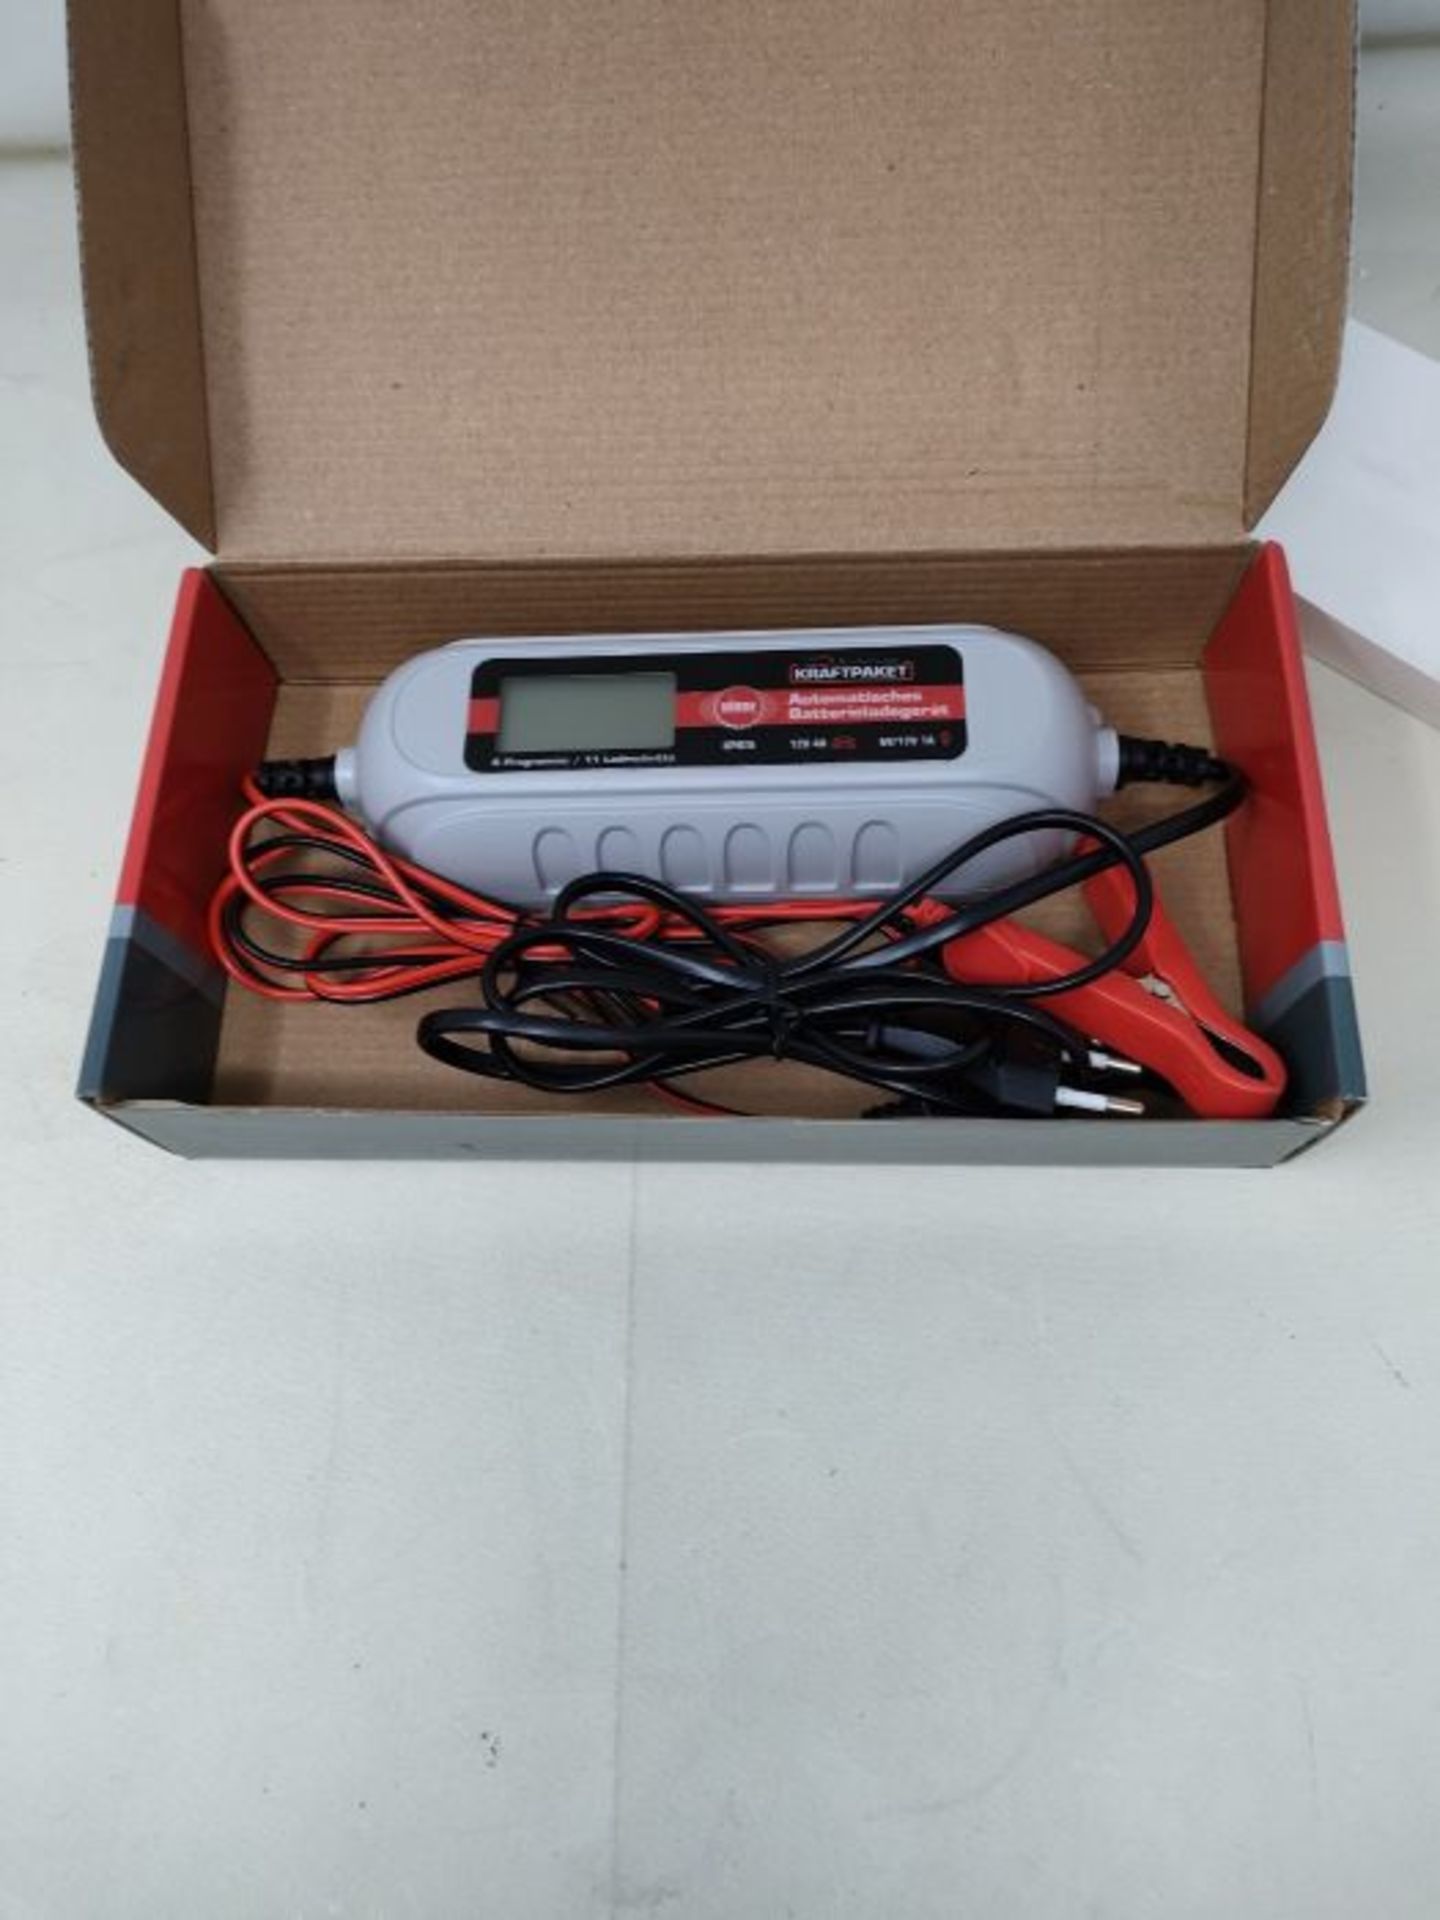 Dinosaur Power Pack 6 V/12 V/4 A Battery Charger with Tester. IP65 for Vehicle Car - Image 3 of 3